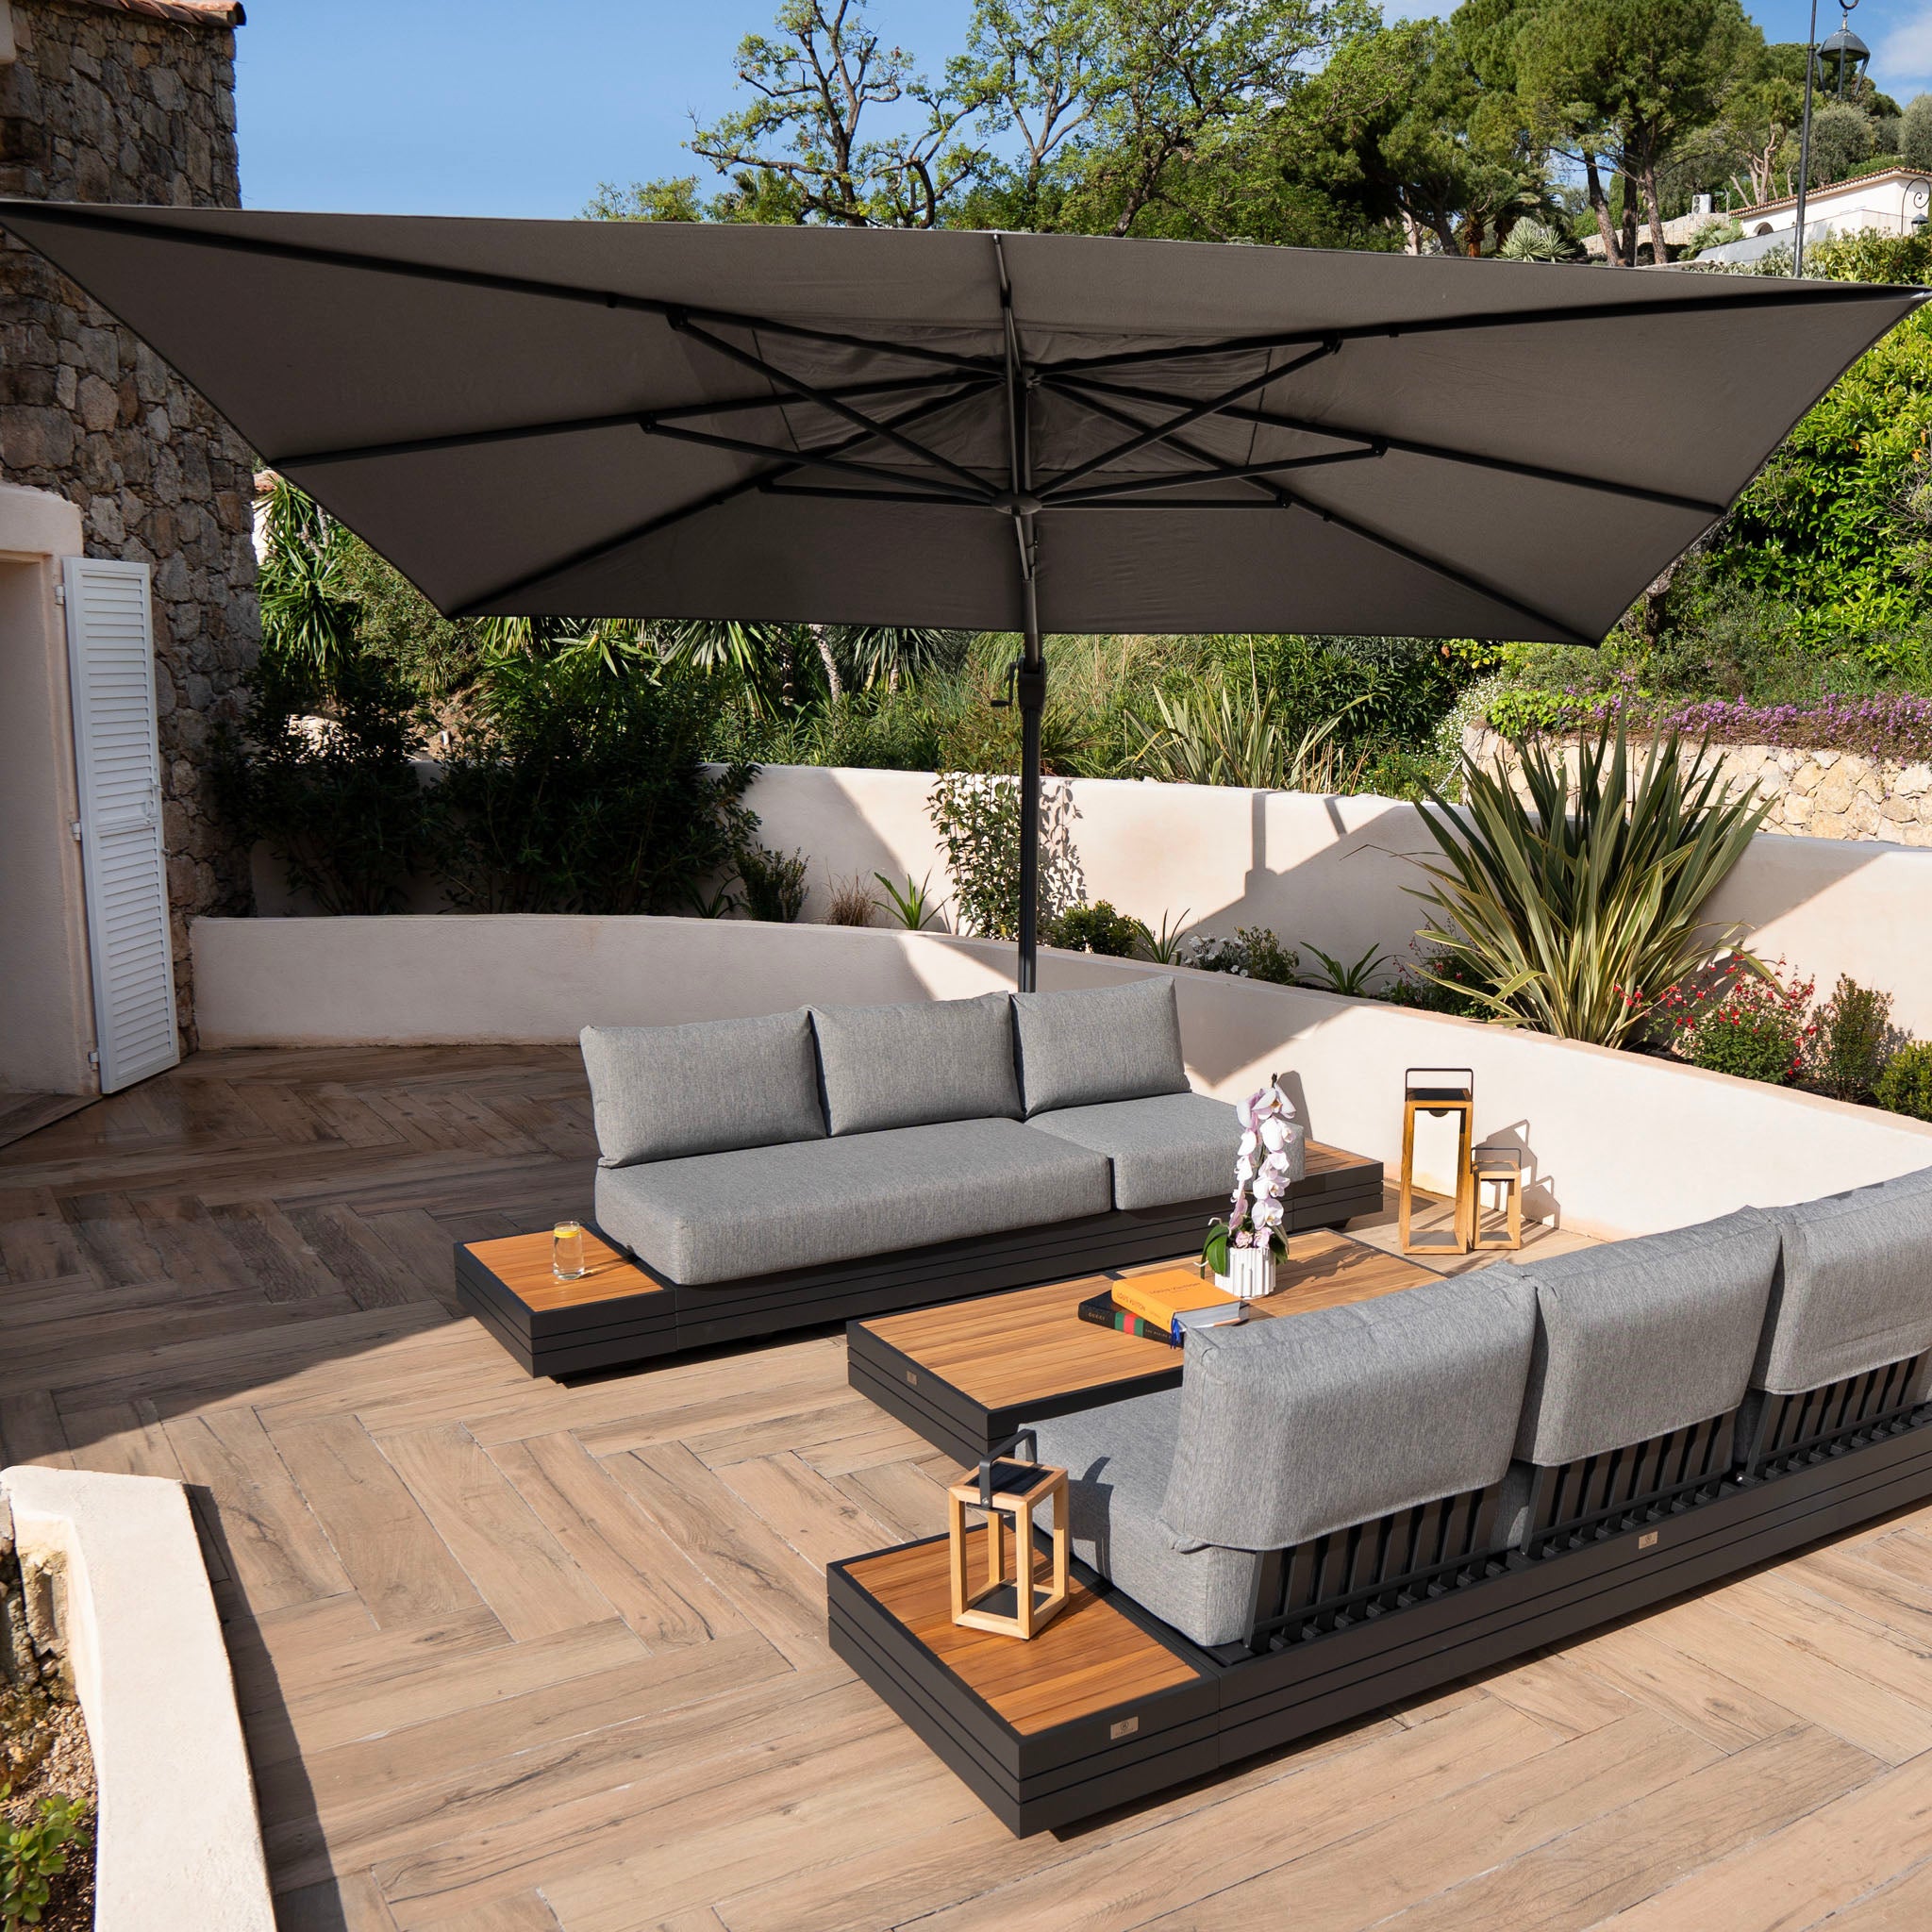 Hacienda 3m x 4m Cantilever Parasol With Granite Base & Cover in Charcoal